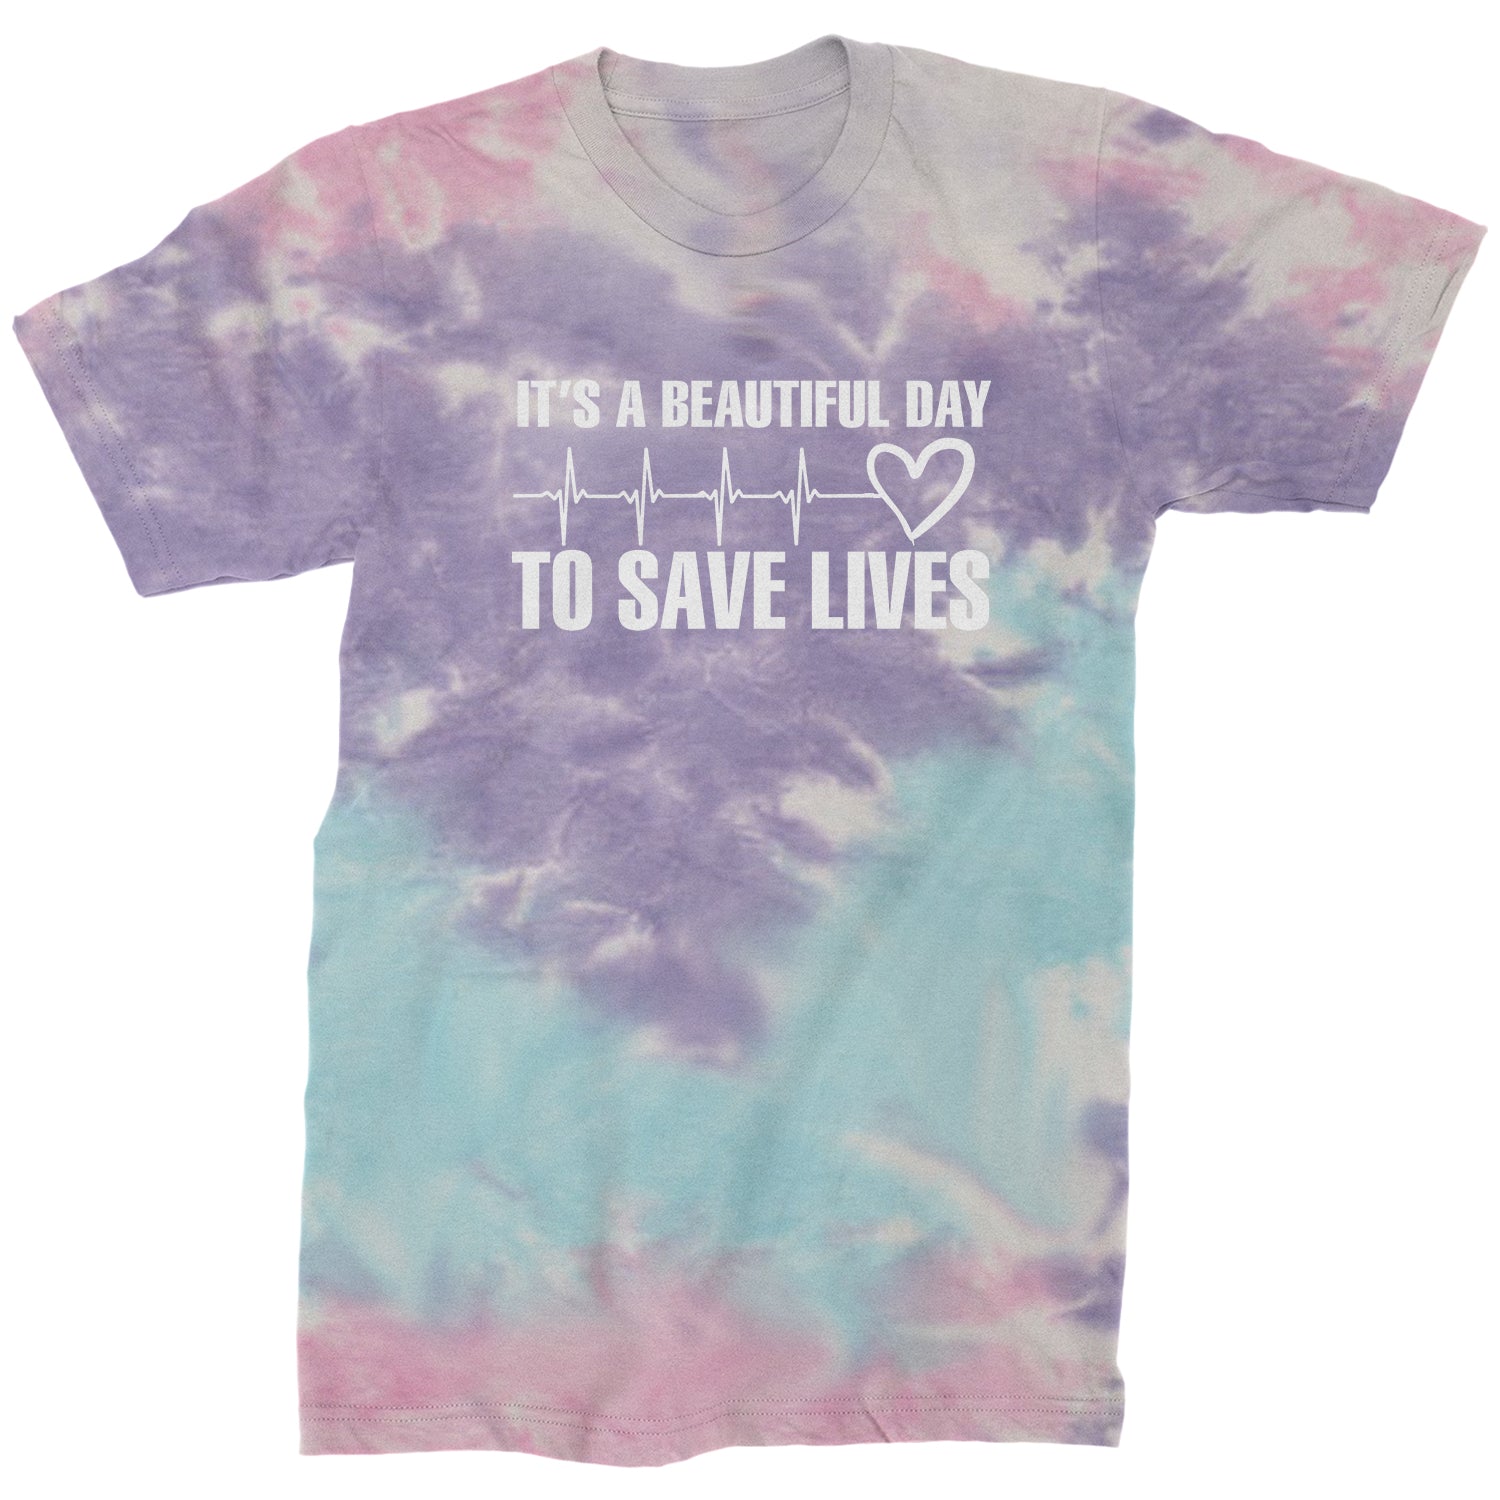 It's A Beautiful Day To Save Lives (White Print) Mens T-shirt #expressiontees by Expression Tees